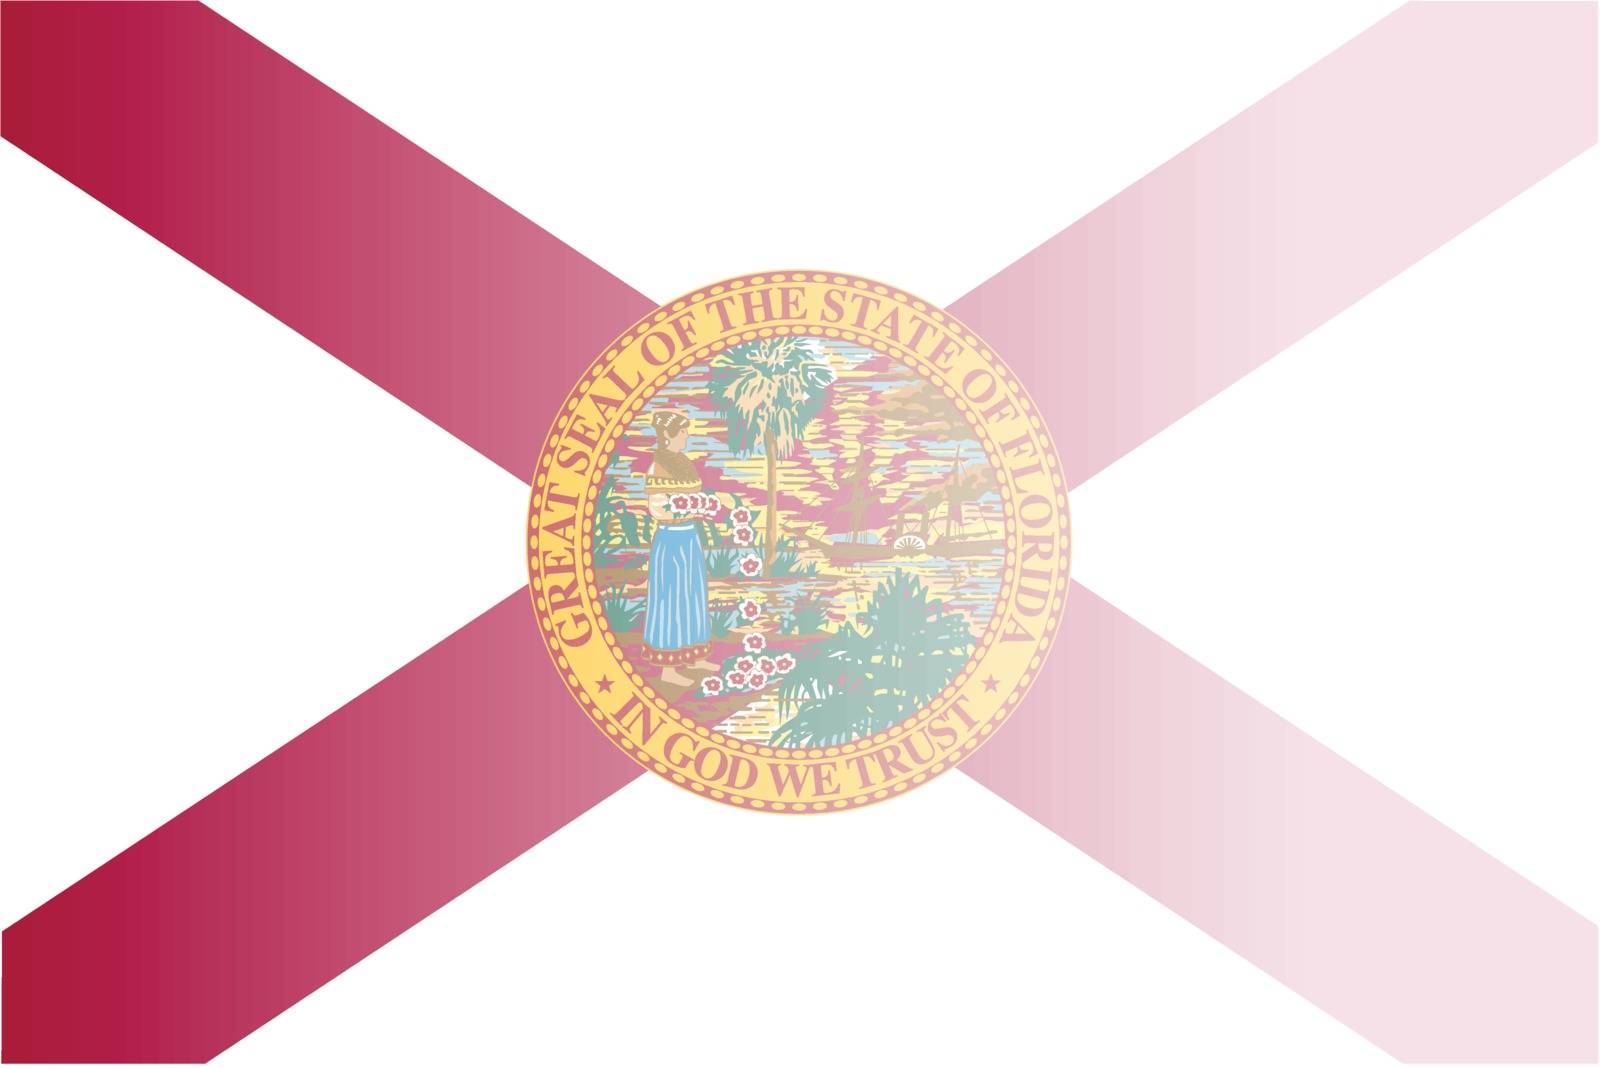 The flag of the USA state of Florida with fade